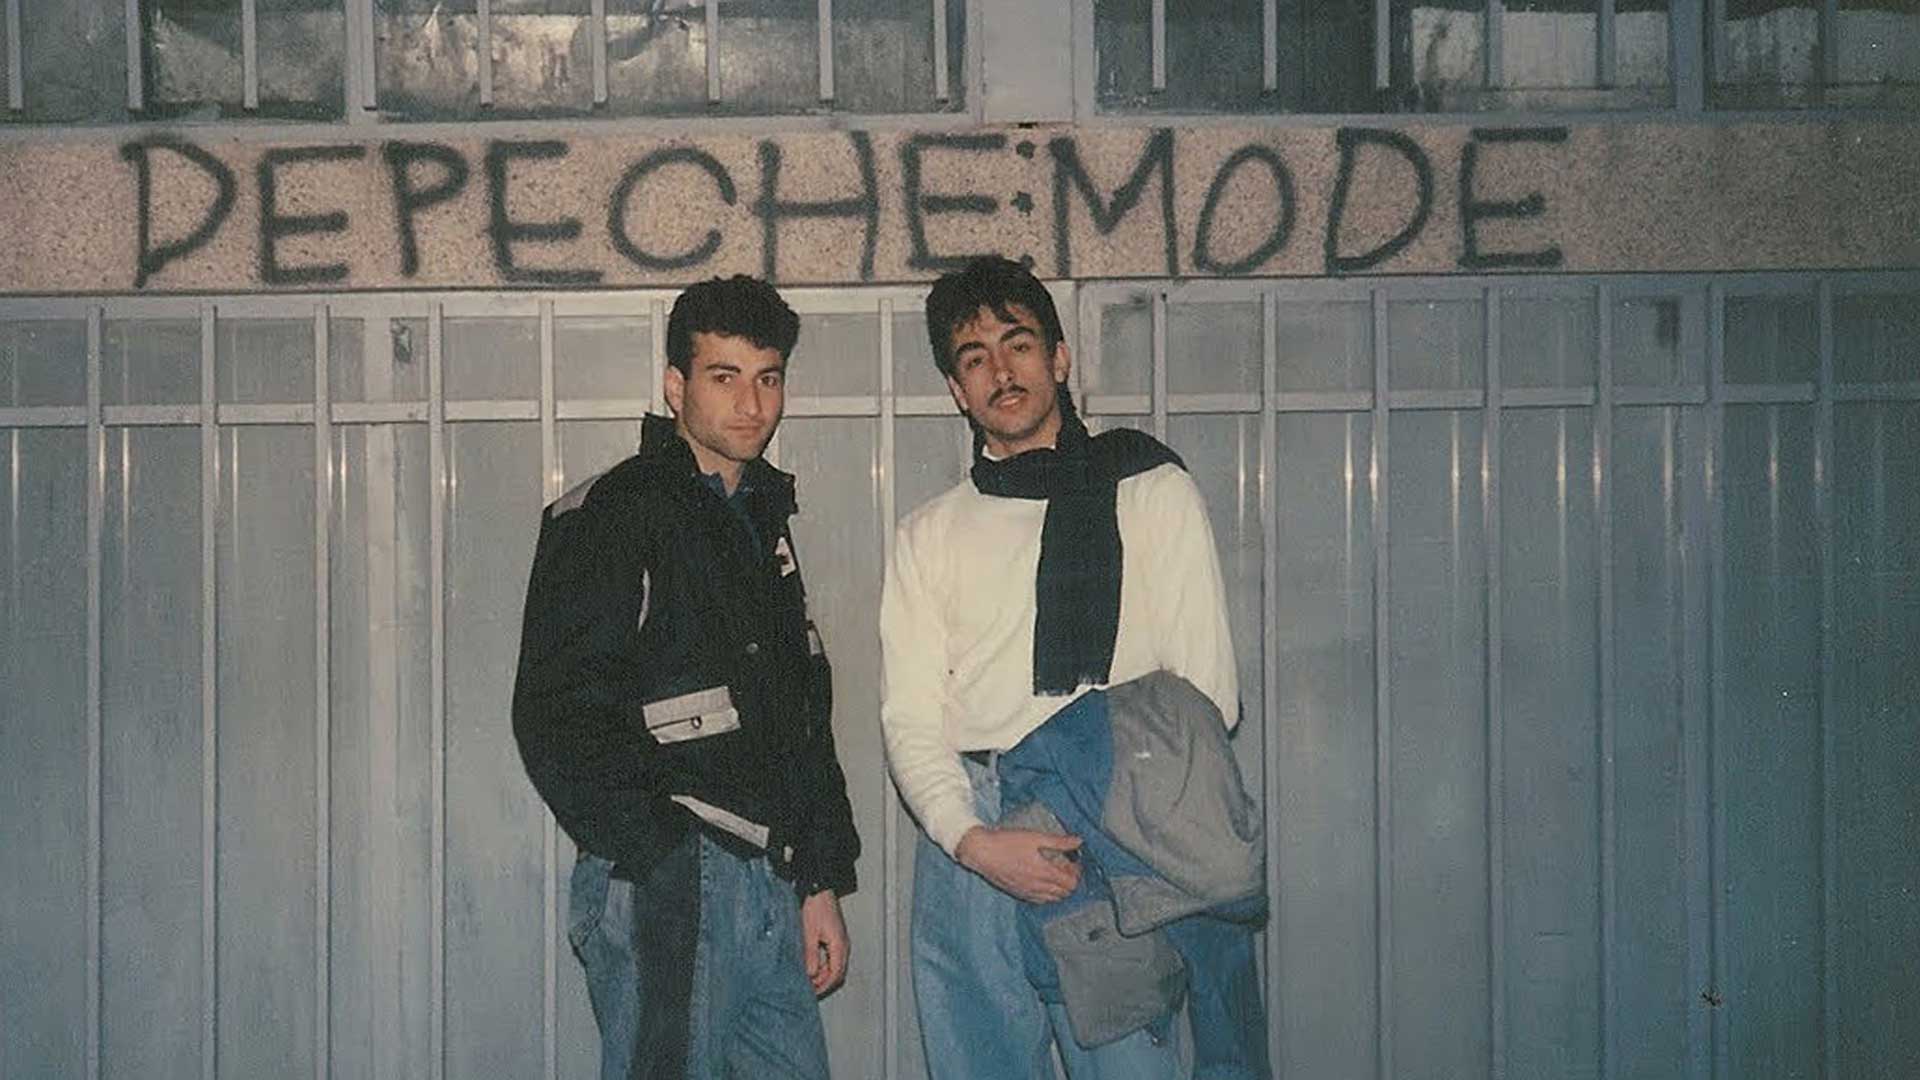 our hobby is depeche mode